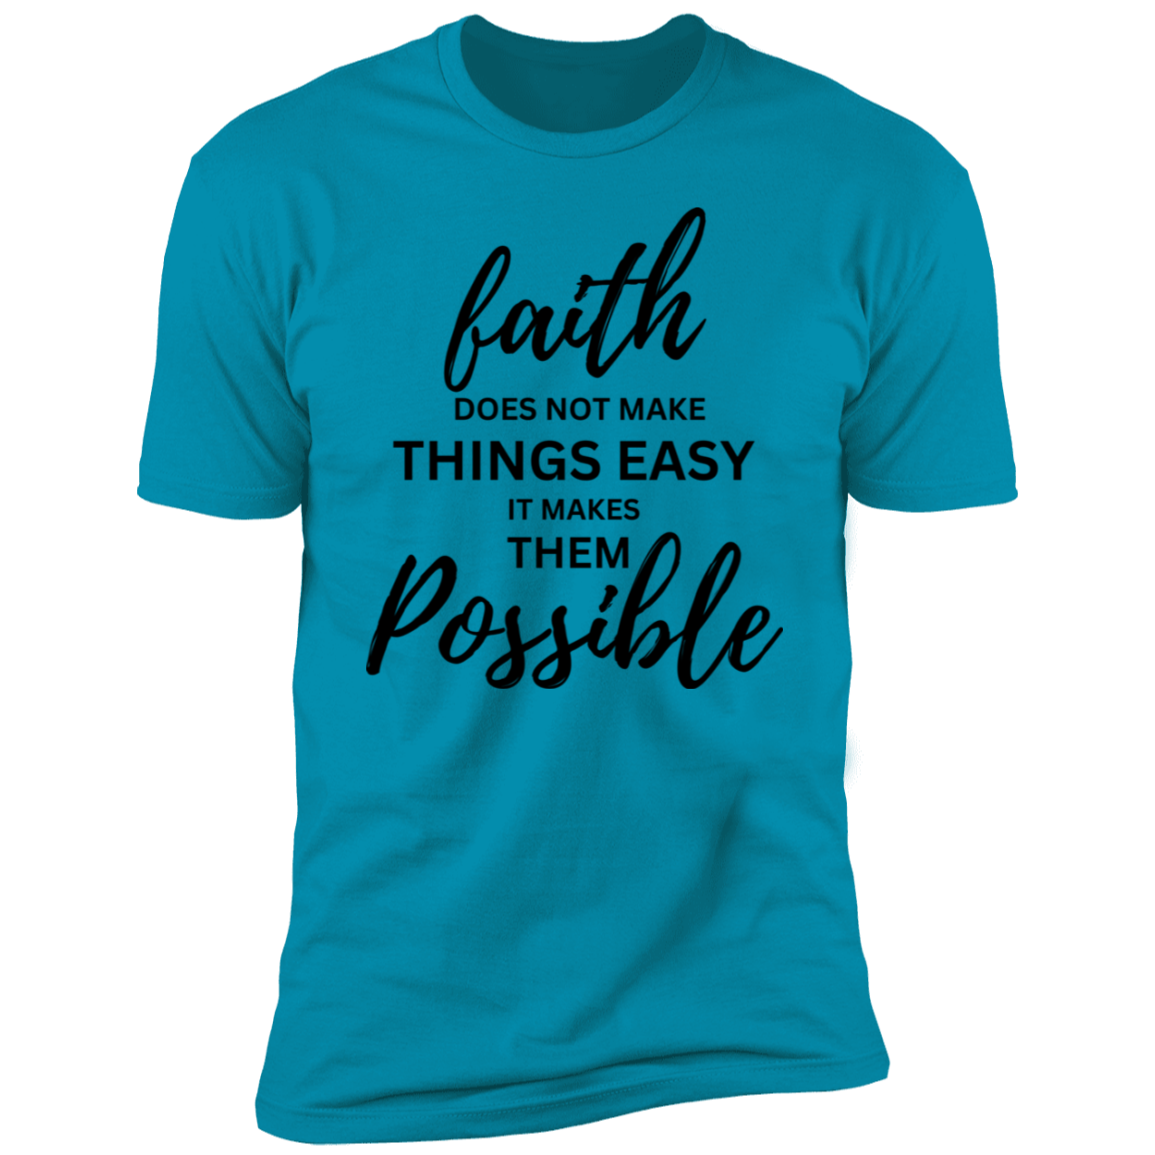 Faith doesn't make things easy